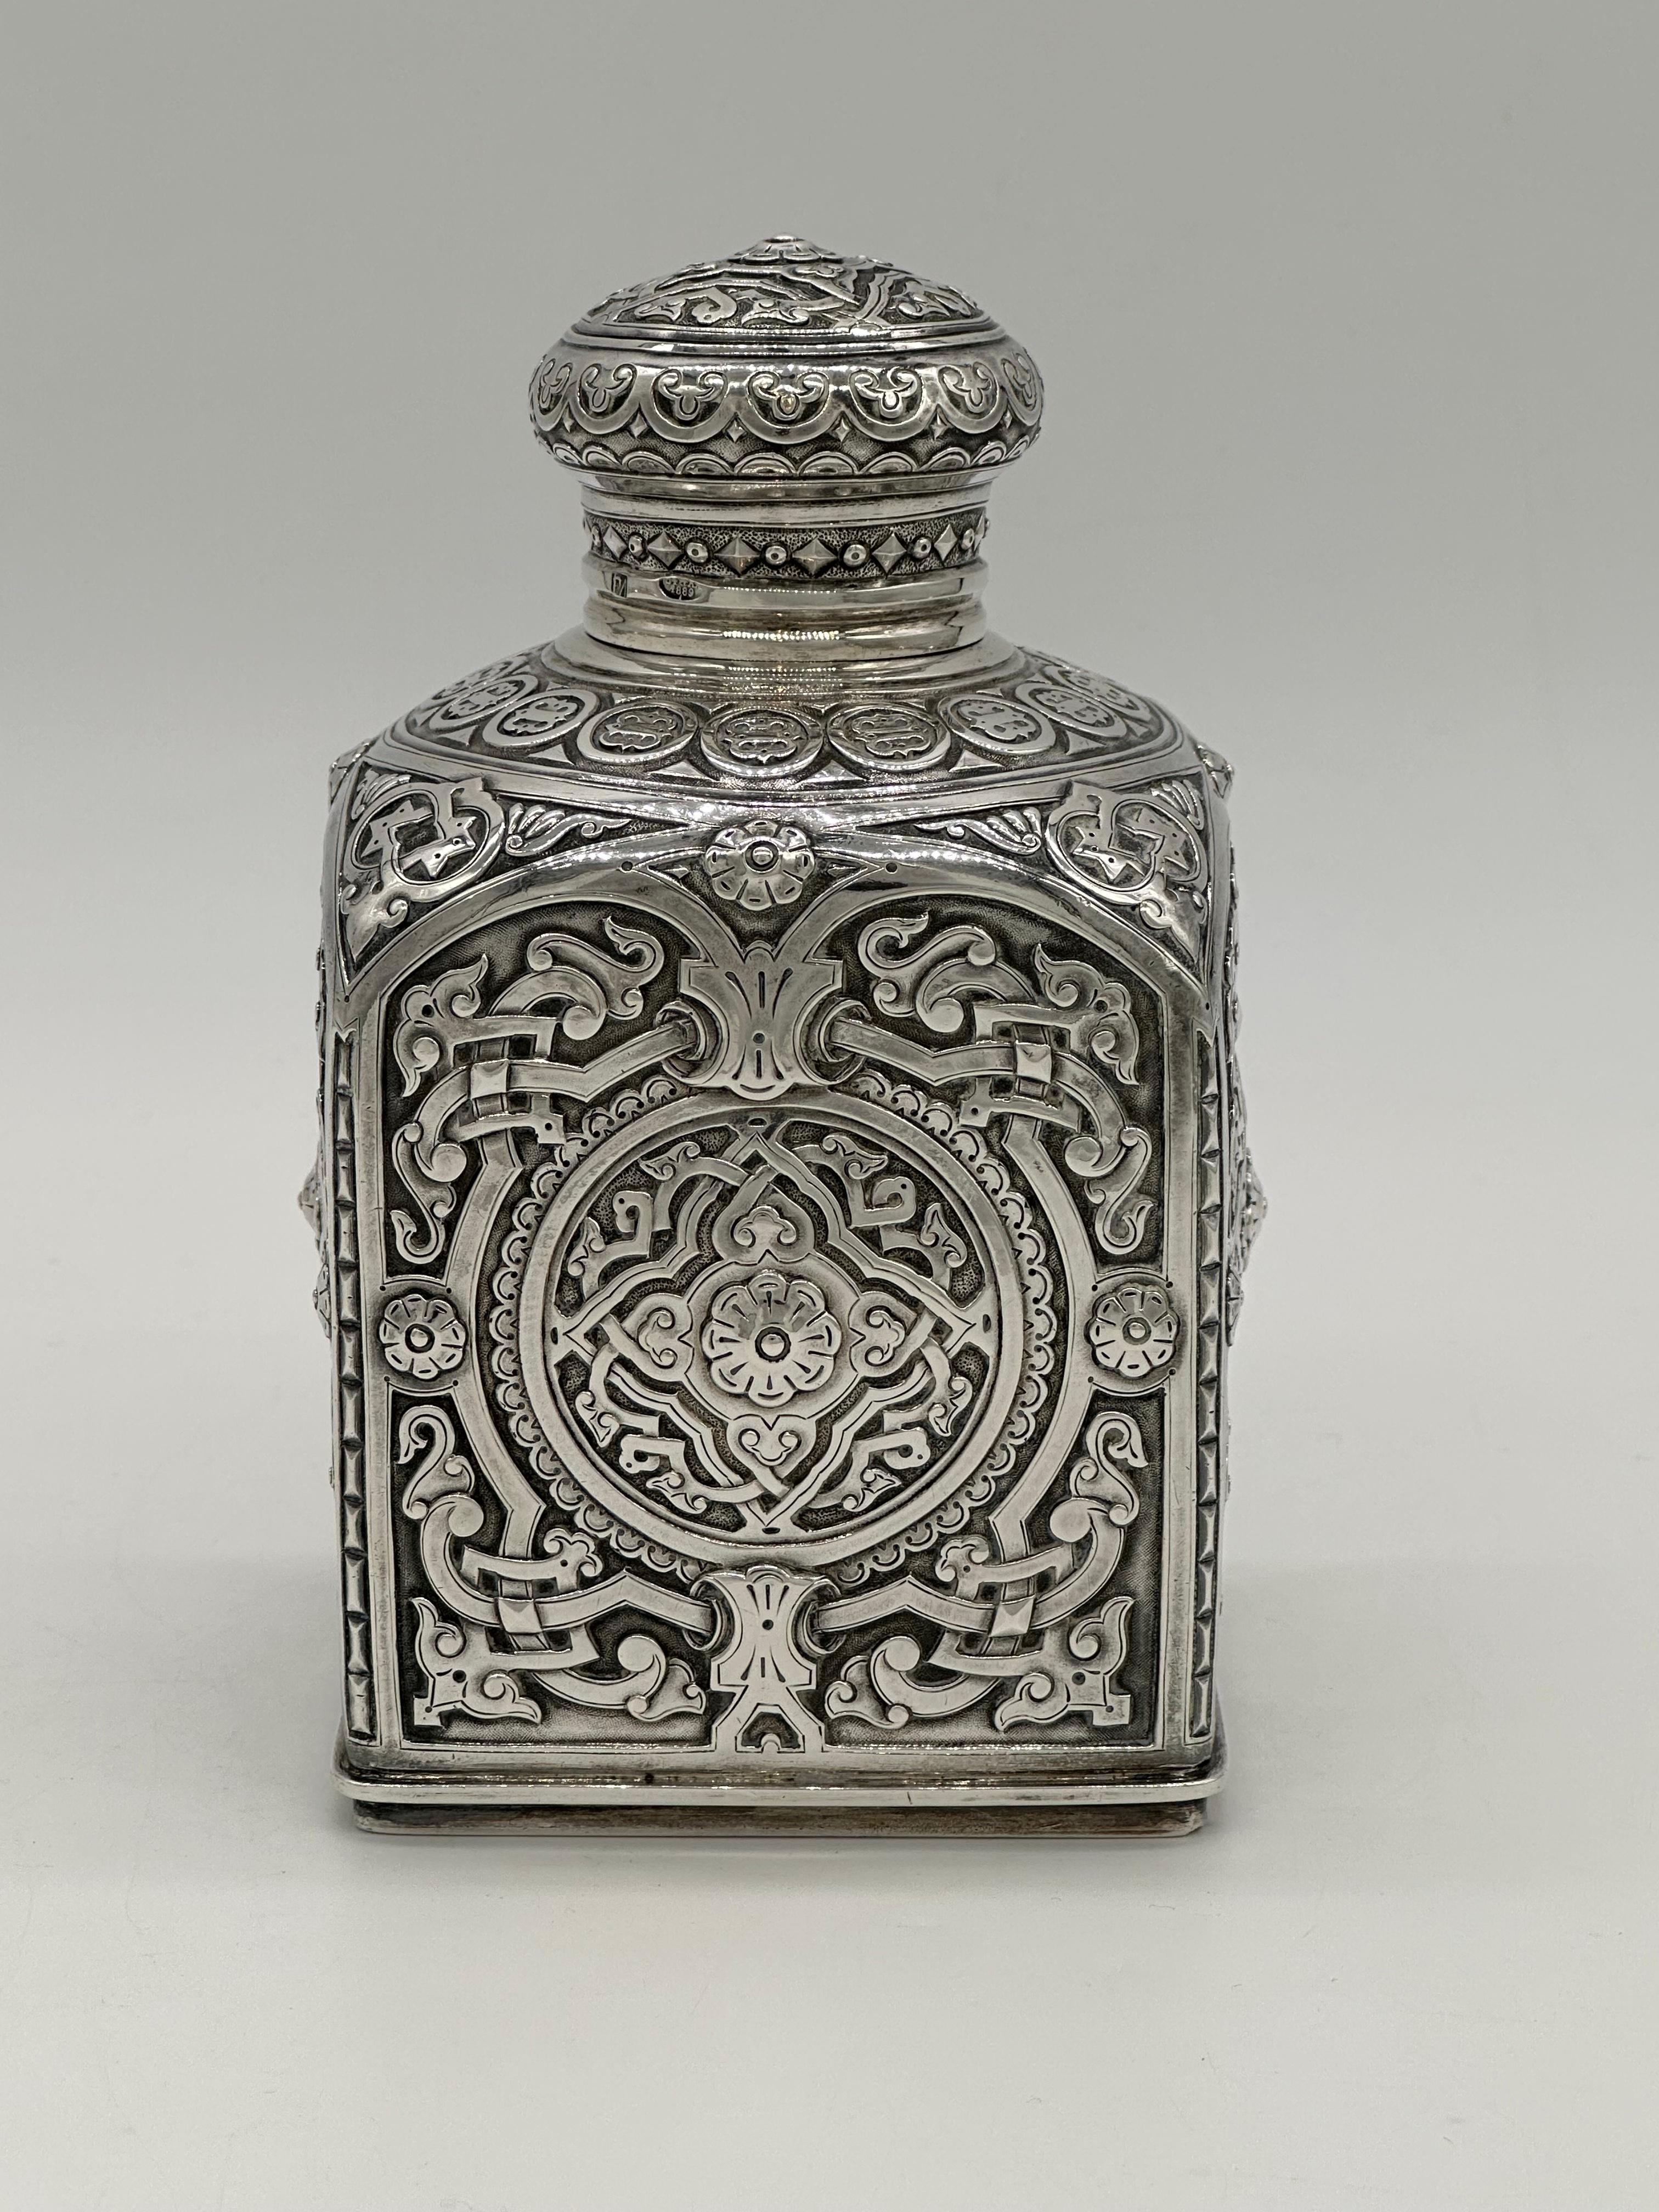 Late 19th Century Amazing Antique Russian Imperial Silver Tea Caddy, Loskutov, Moscow 1889